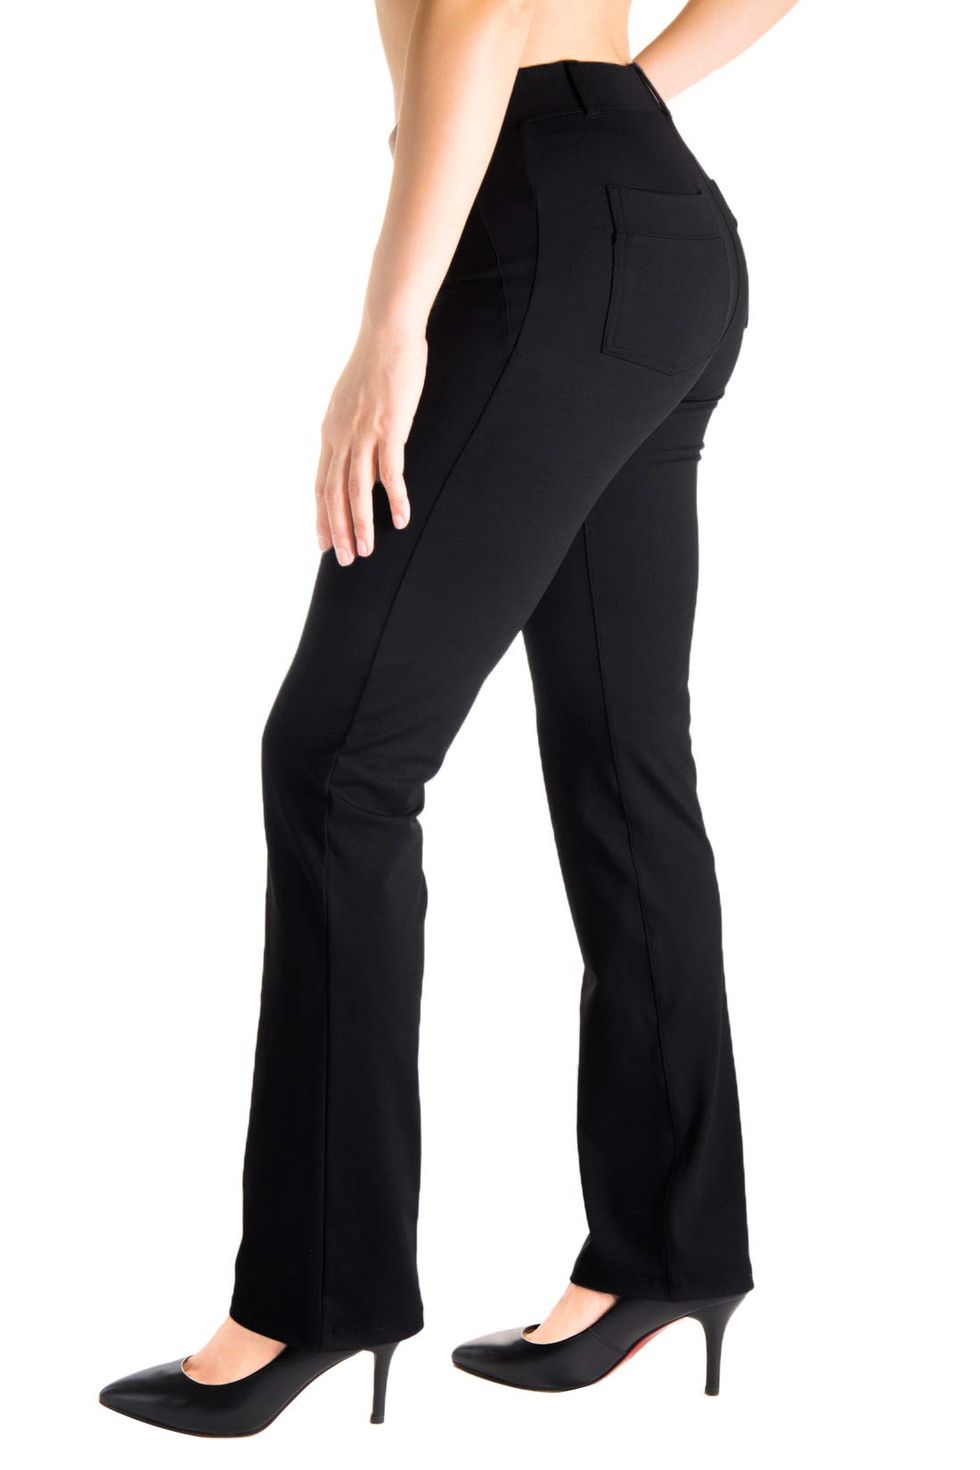  Ginasy Womens Paperbag Pants High Waisted Business Casual Pants  Work Office Elastic Slacks Straight Leg Dressy Trousers with Pockets Black  : Clothing, Shoes & Jewelry